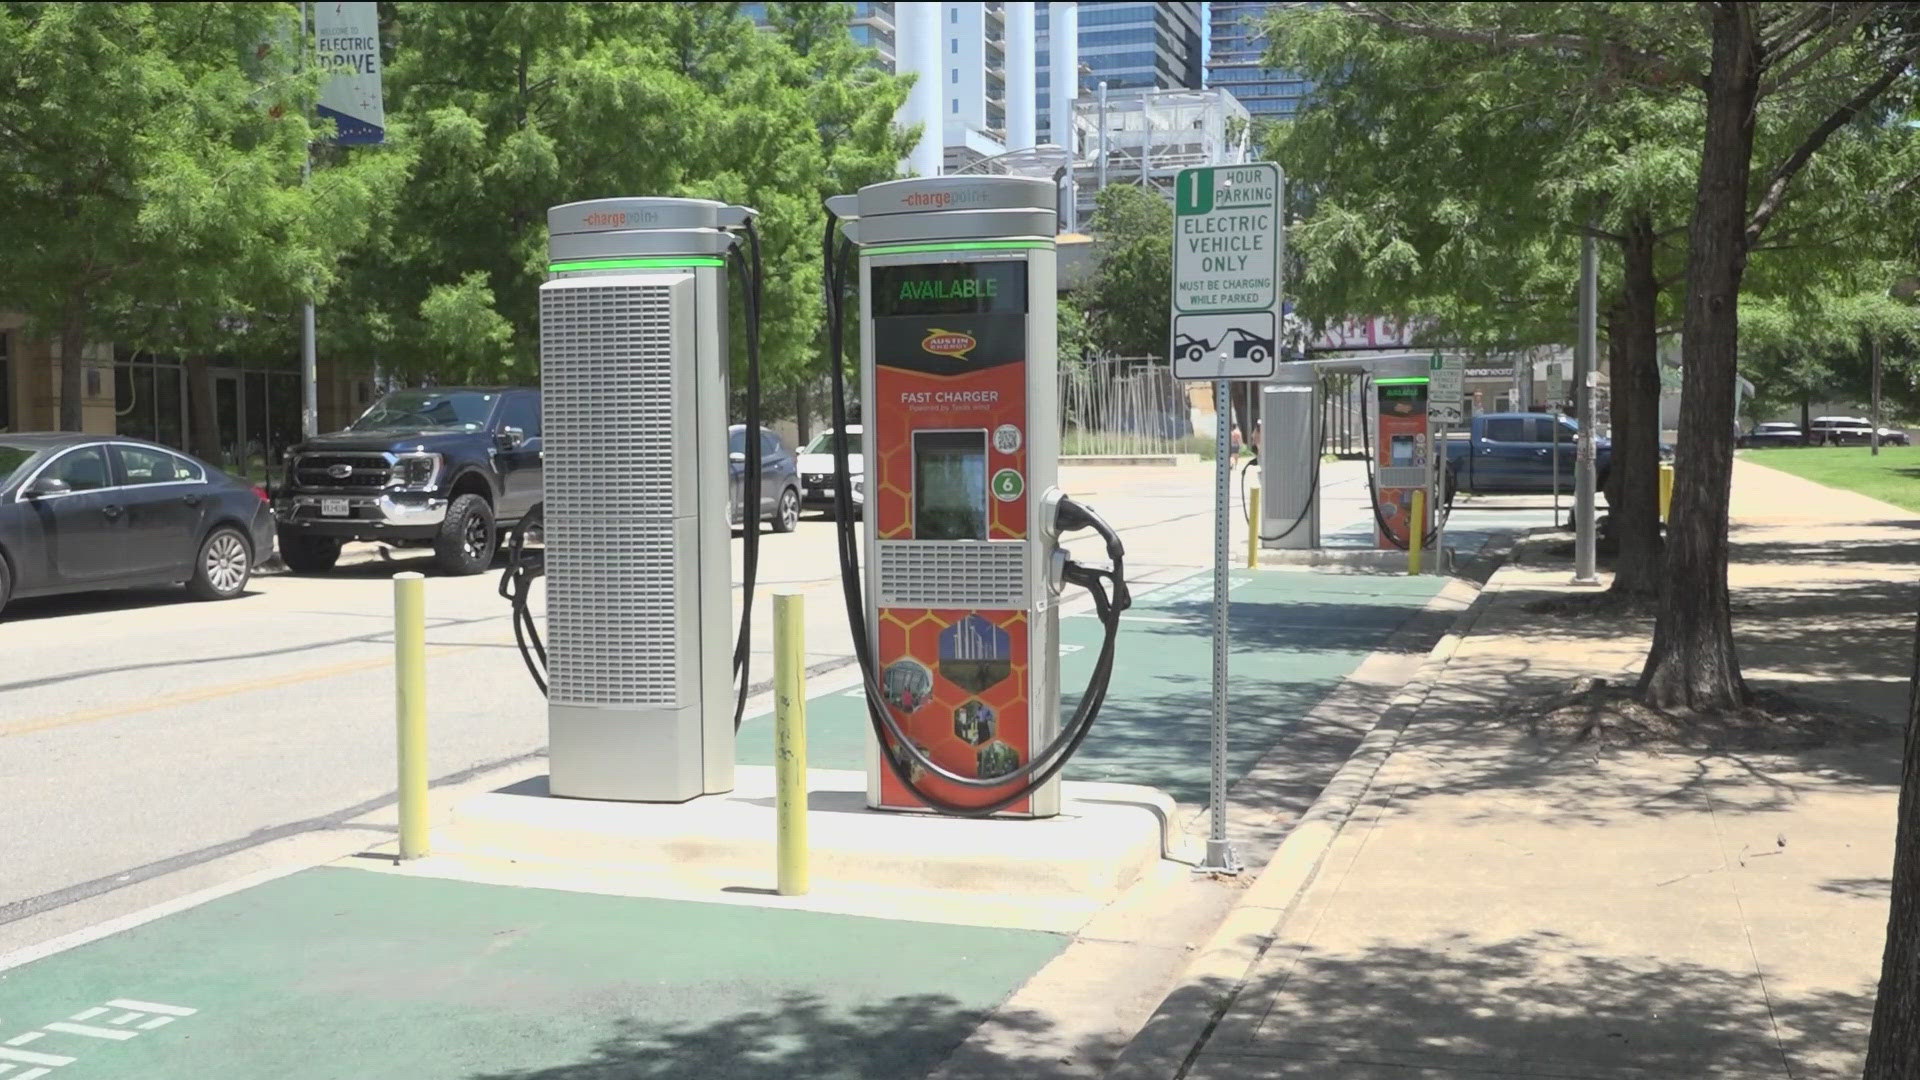 The Austin City Council is considering a proposal to install more electric vehicle chargers throughout the city. It will be discussed this week.